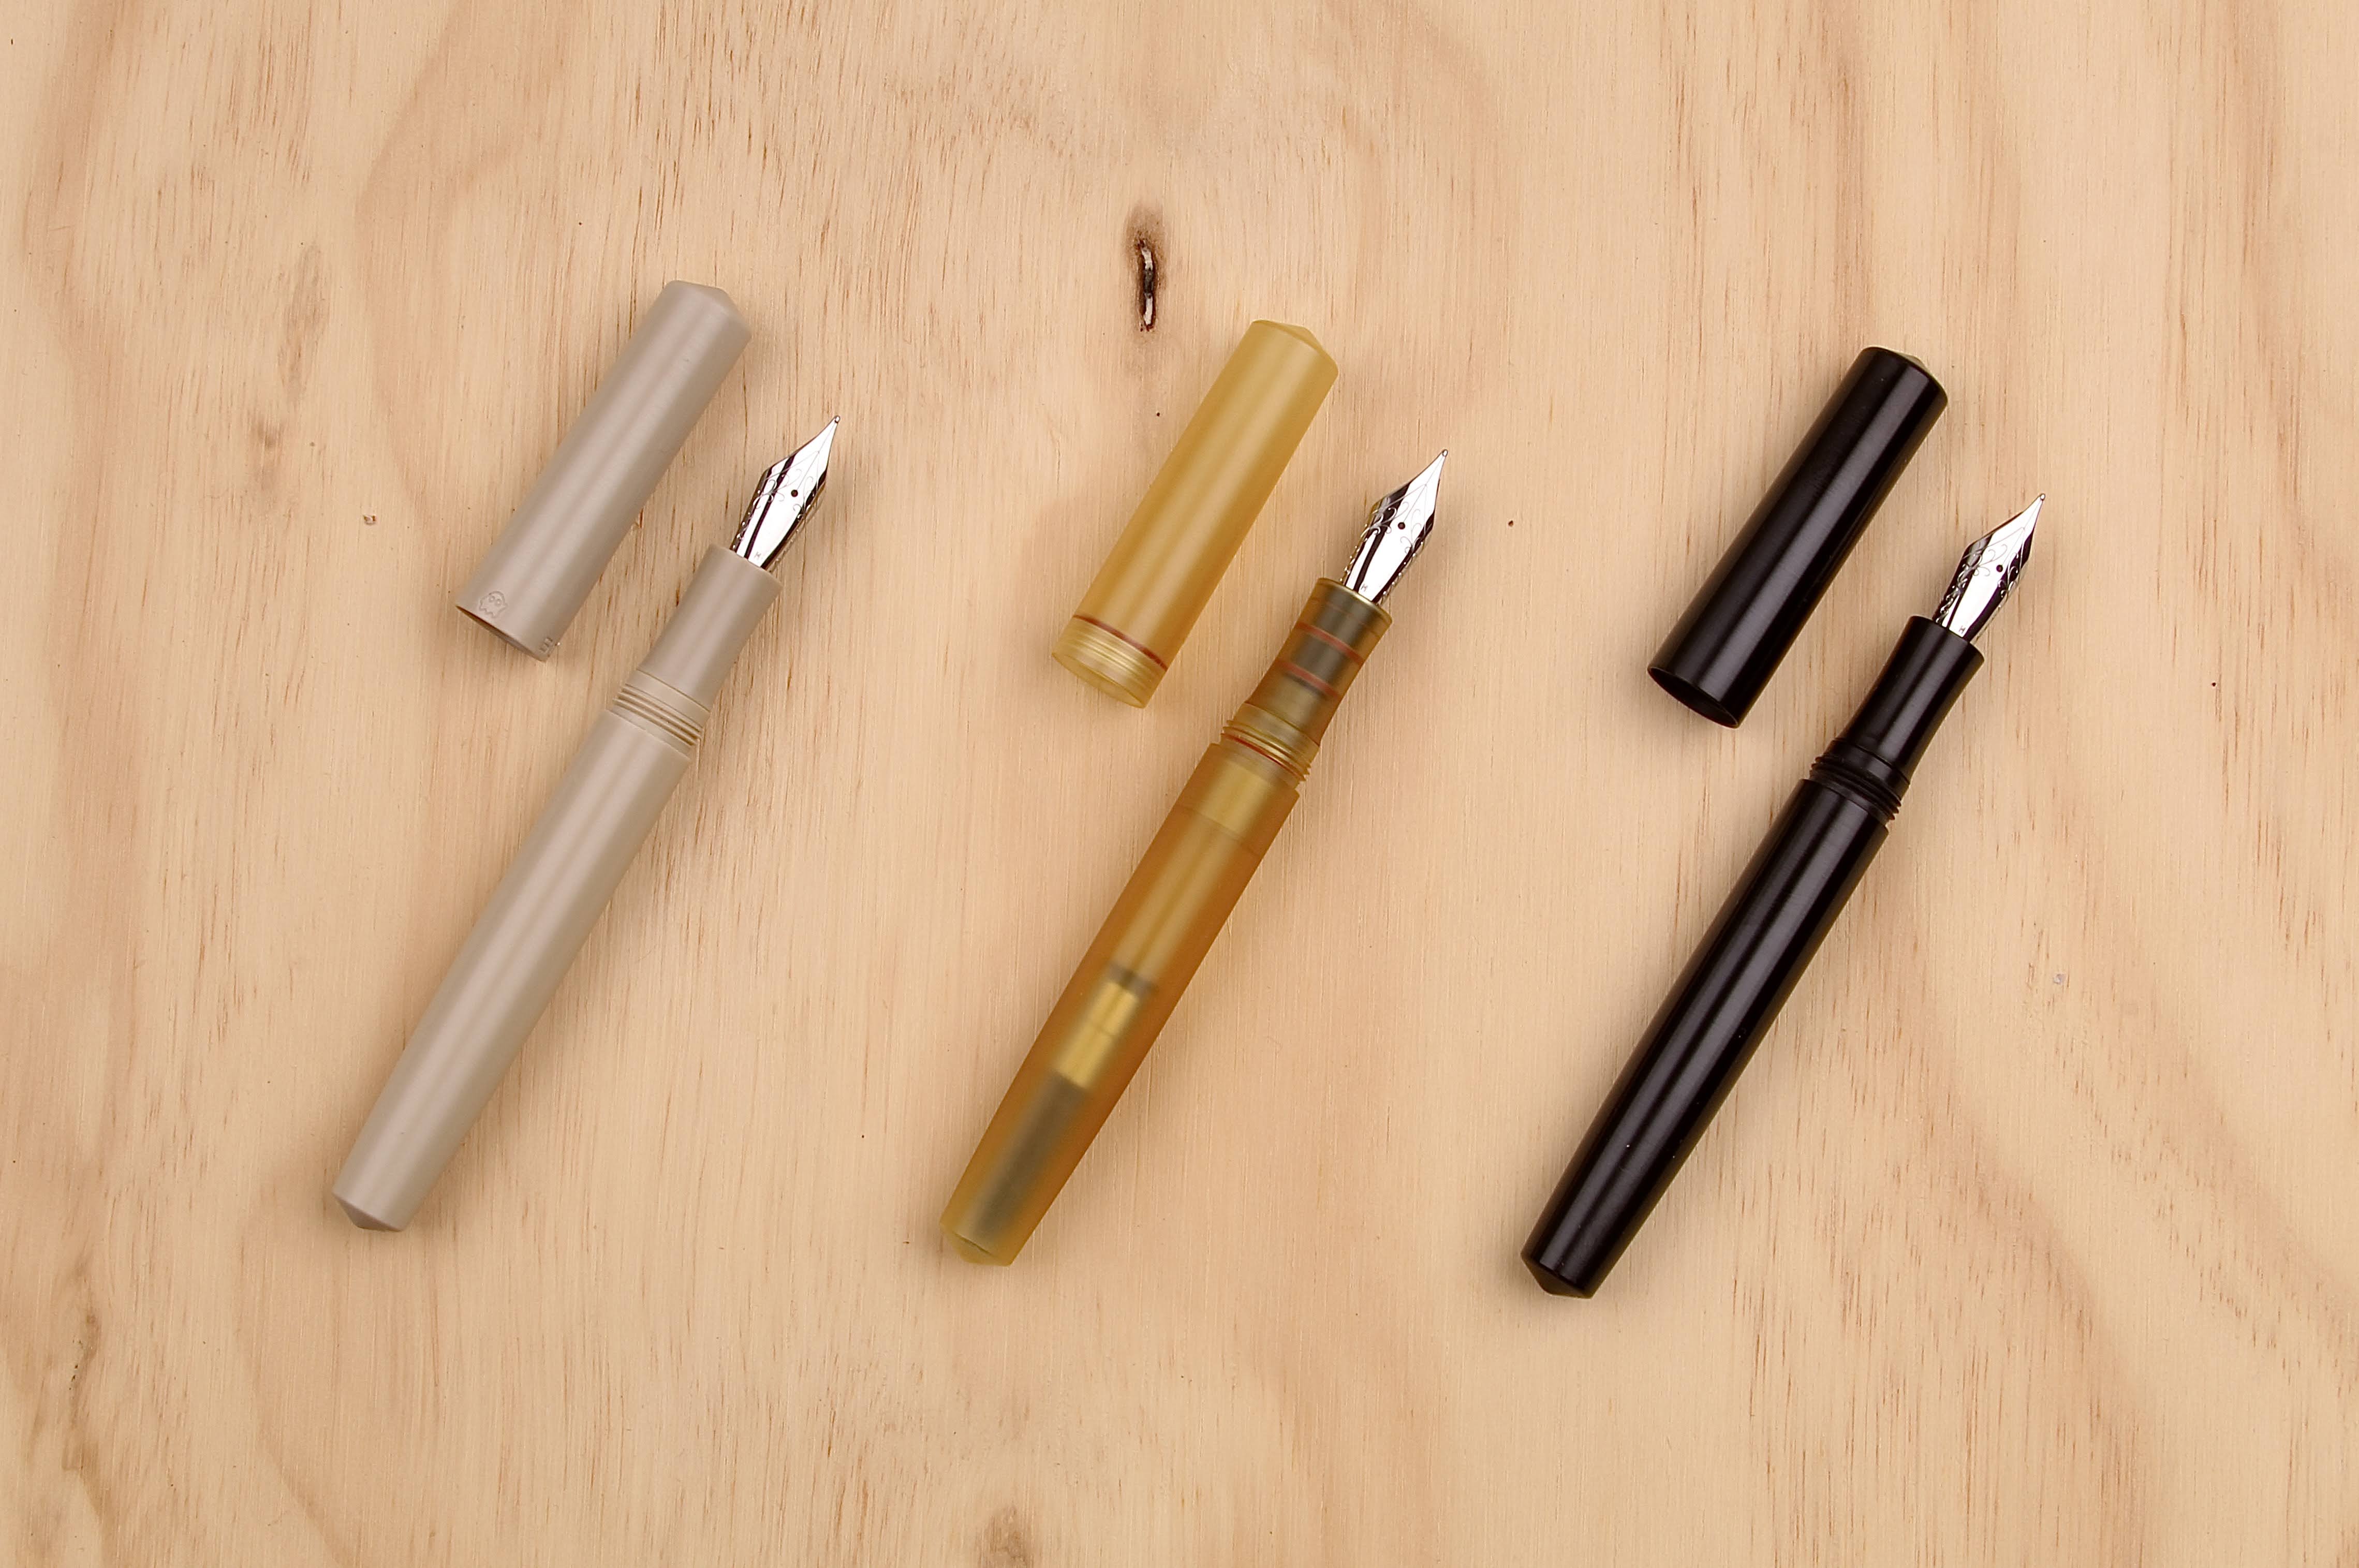 Modern Fountain and Ballpoint Pens. Machined here in Philadelphia!